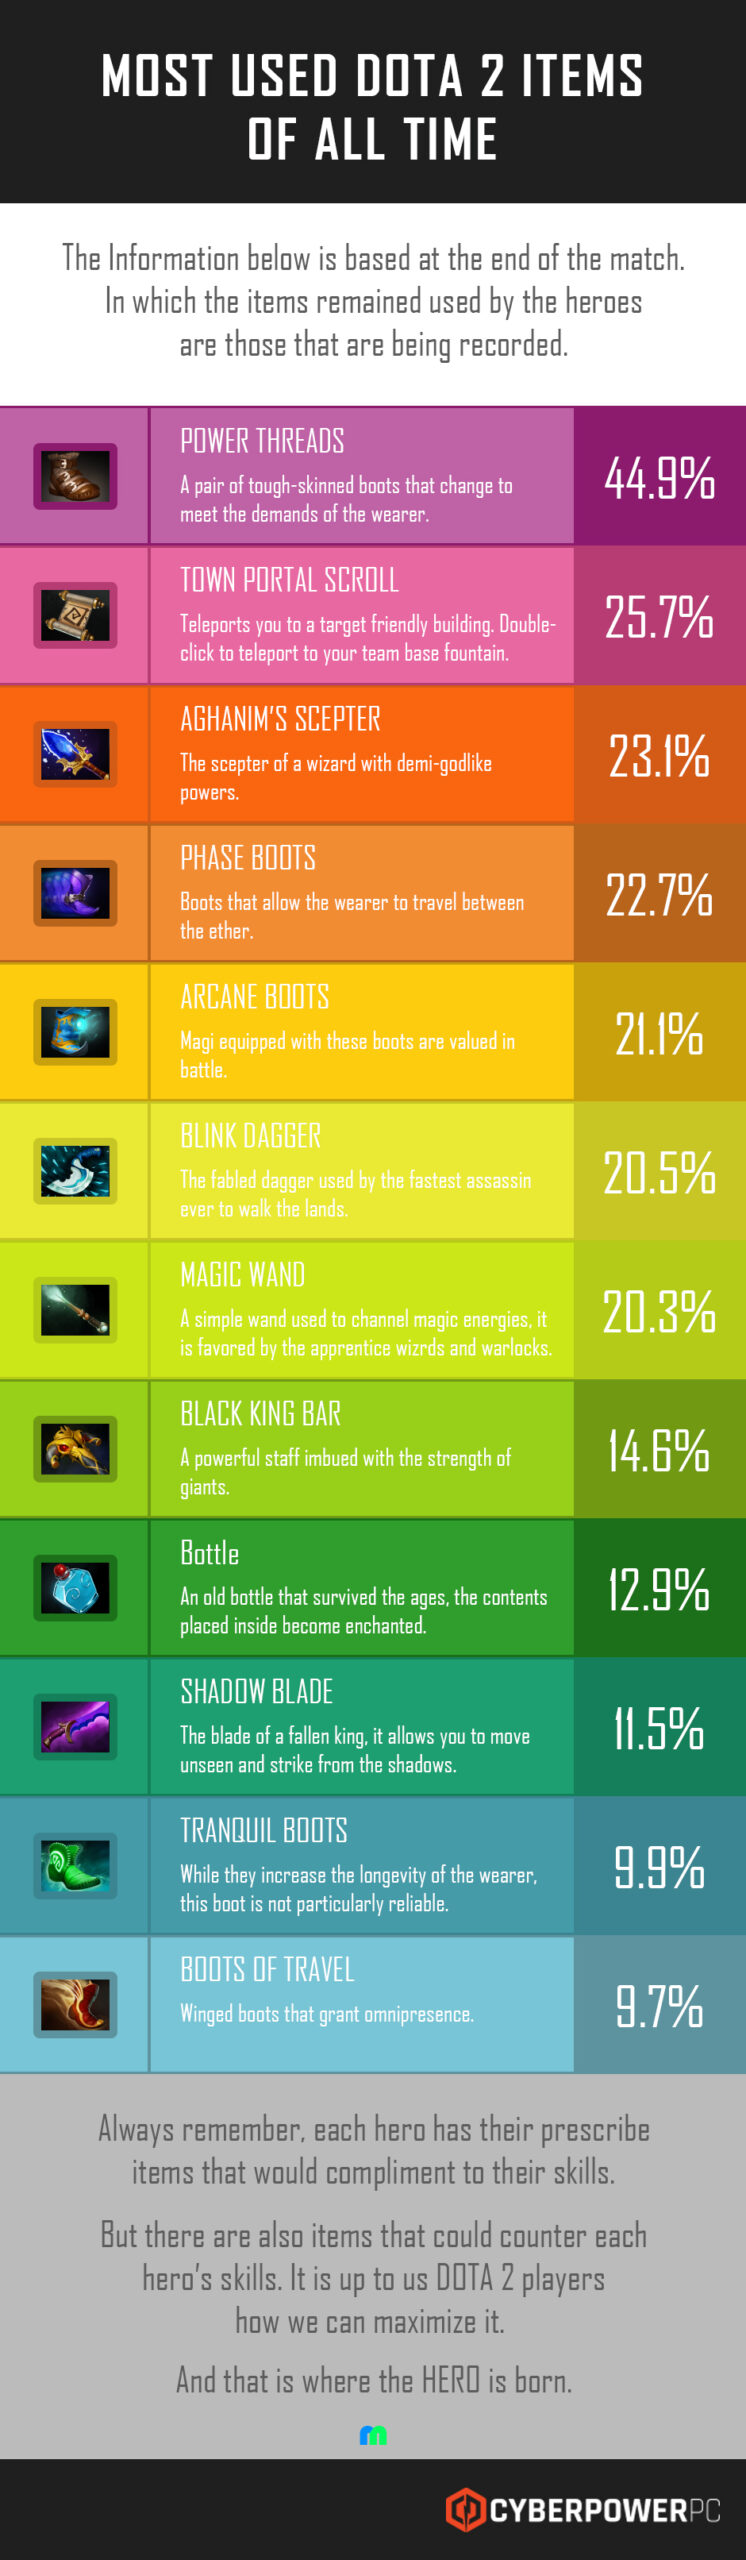 most-used-dota2-items